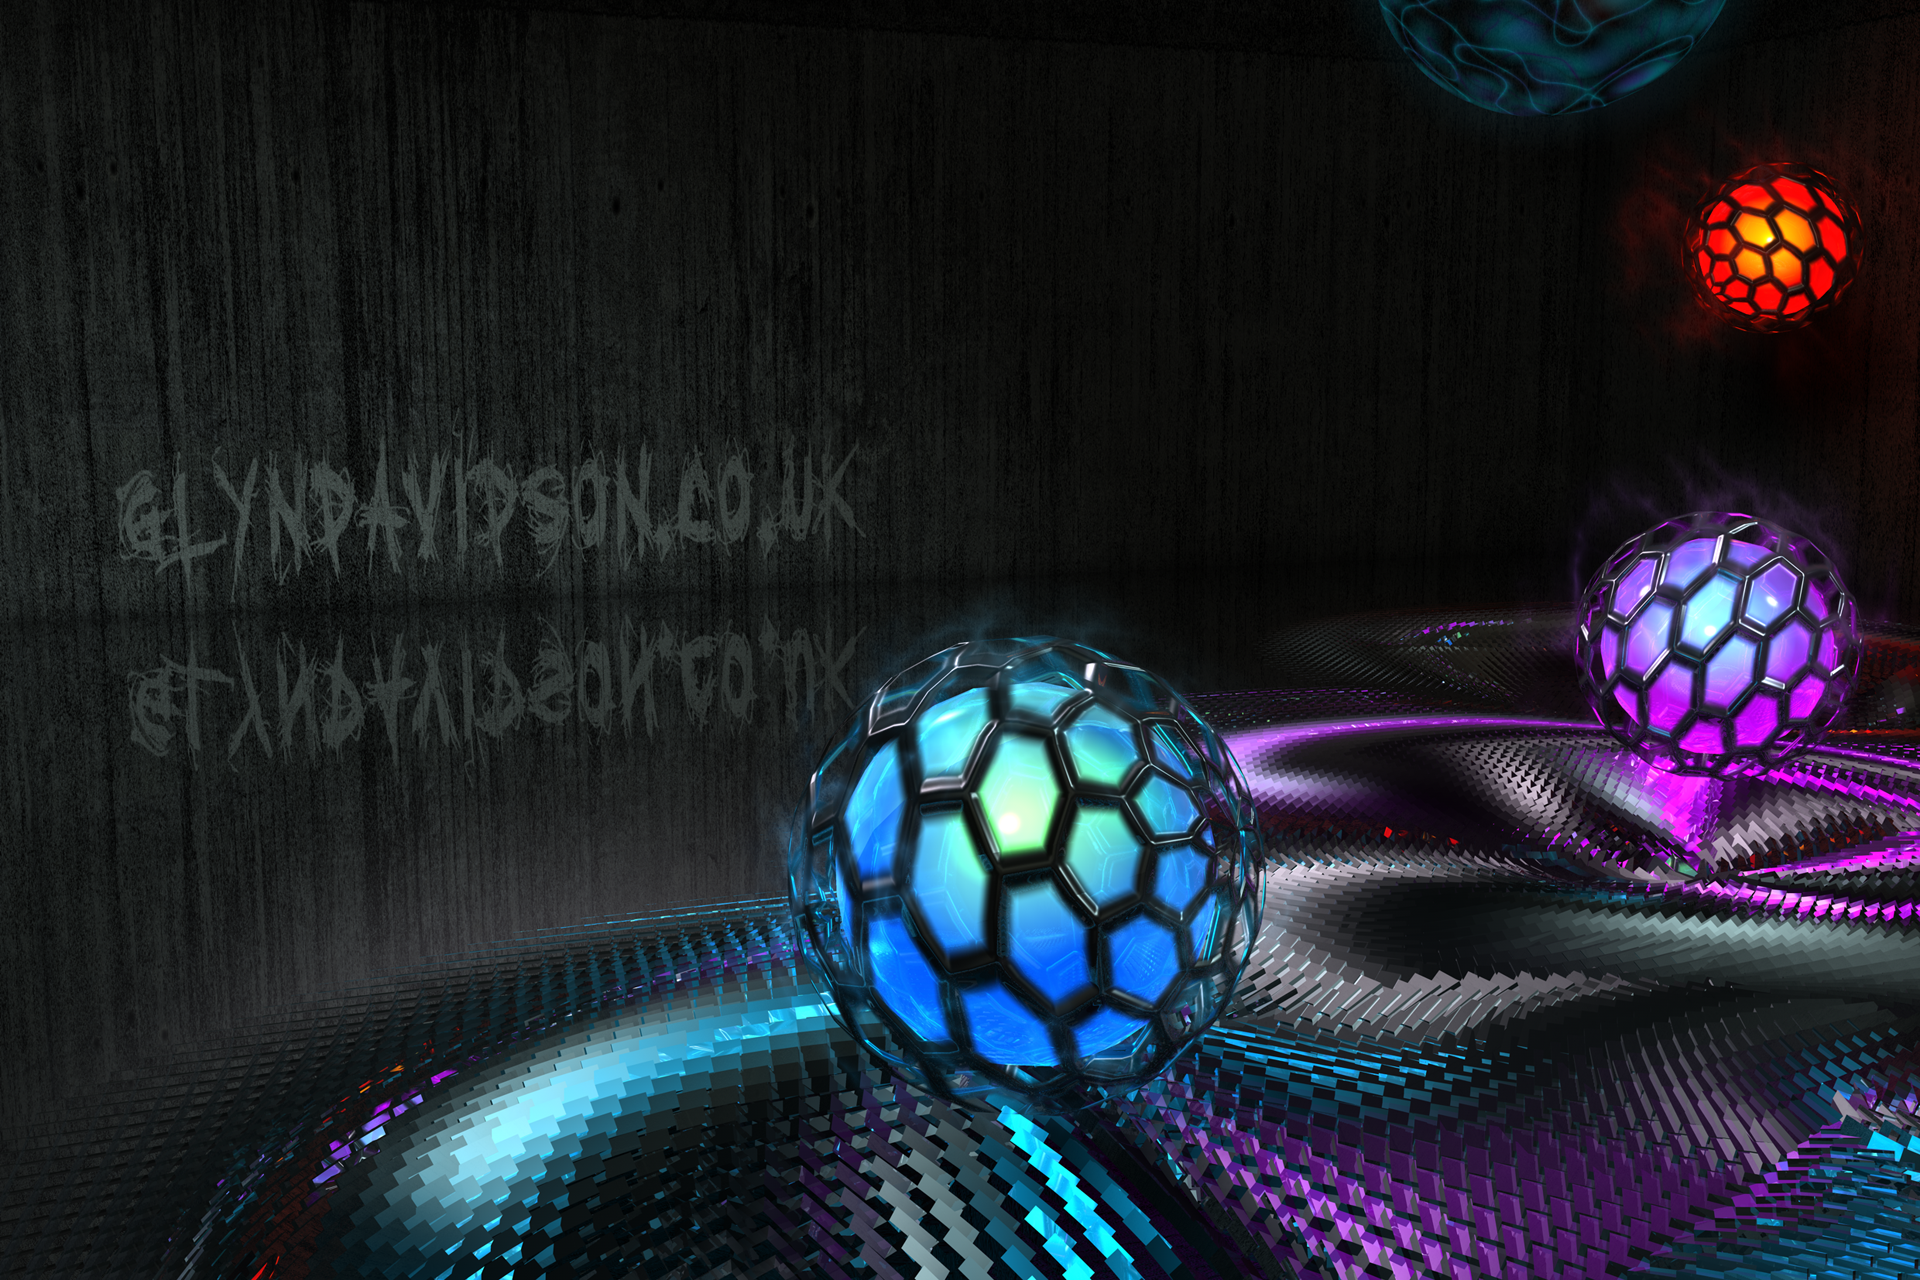 Cinema 4D Mograph wallpaper by TheRealGlyph 1920x1280